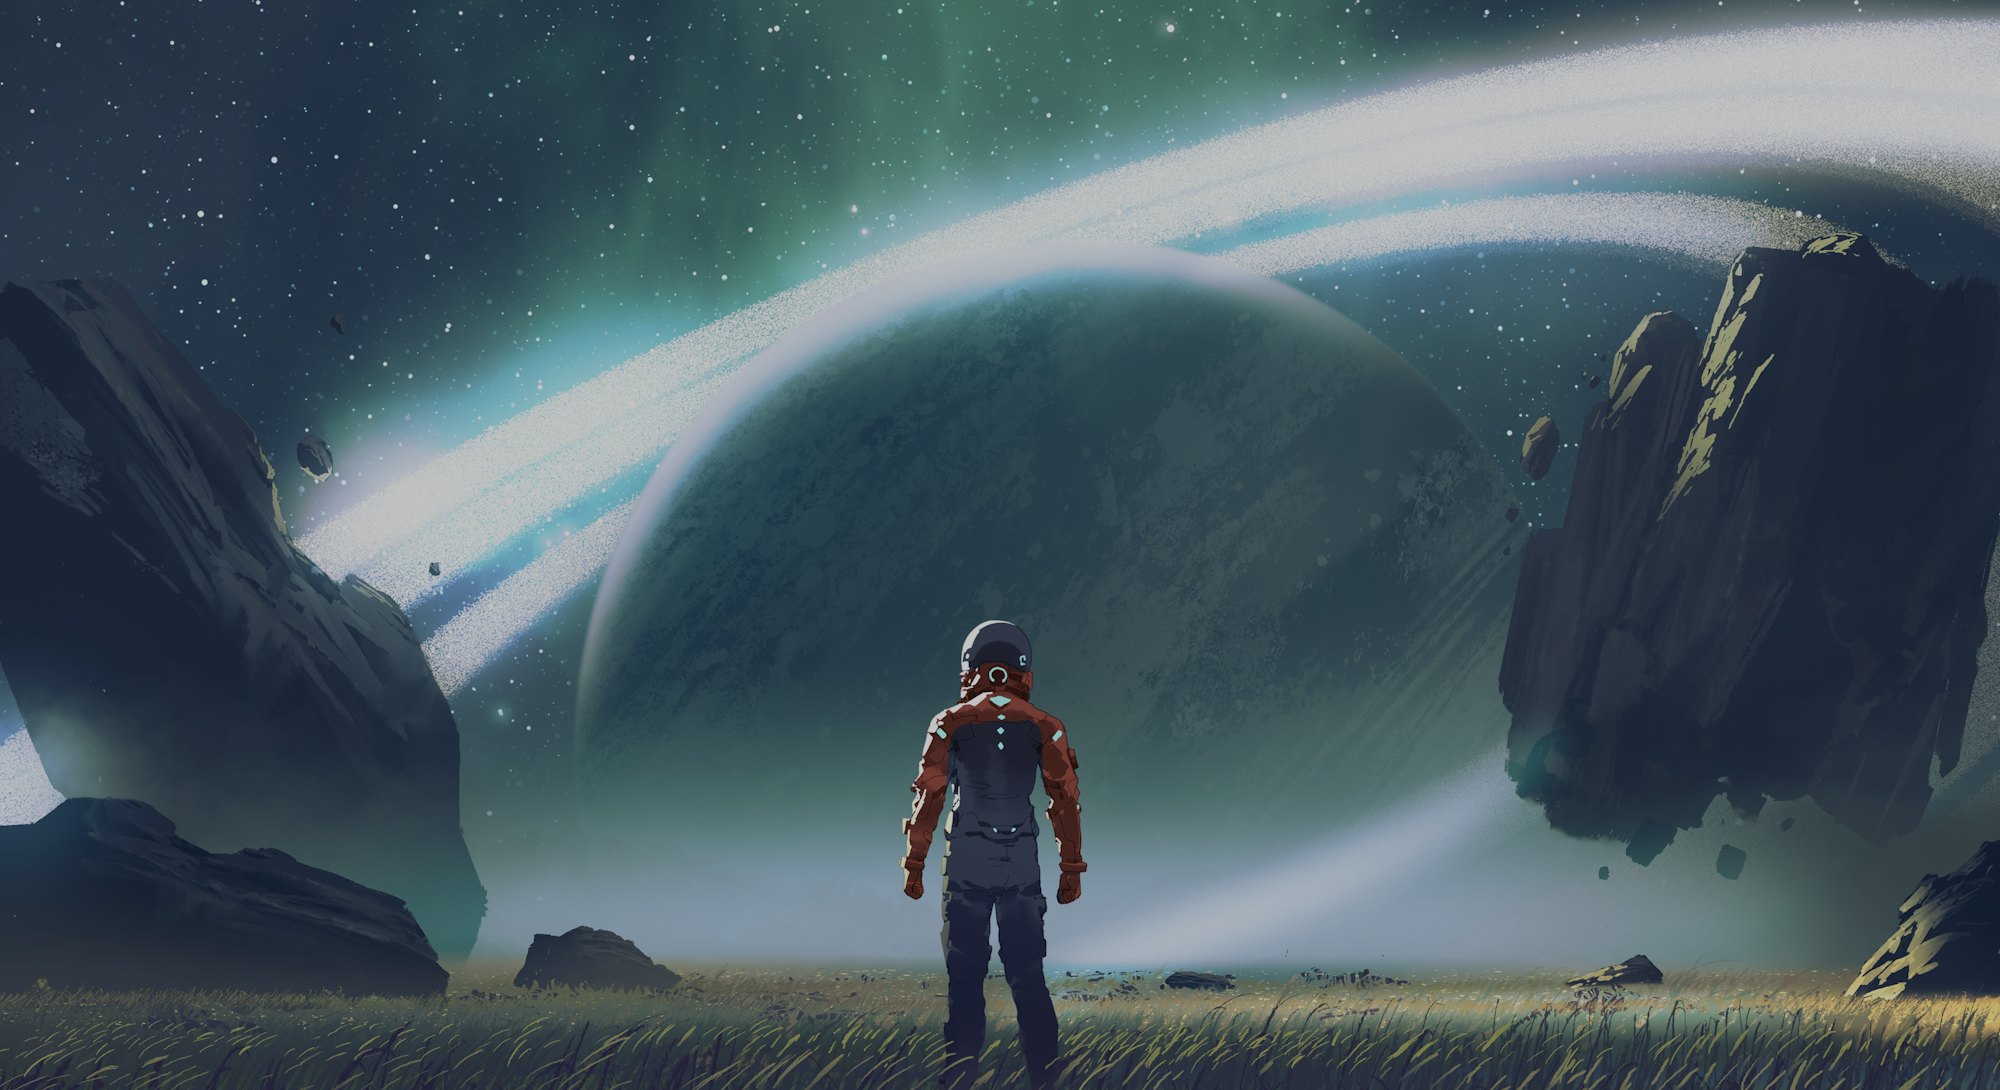 Sci-fi scene showing futuristic man standing in a field looking at the planet with giant rings, digi...